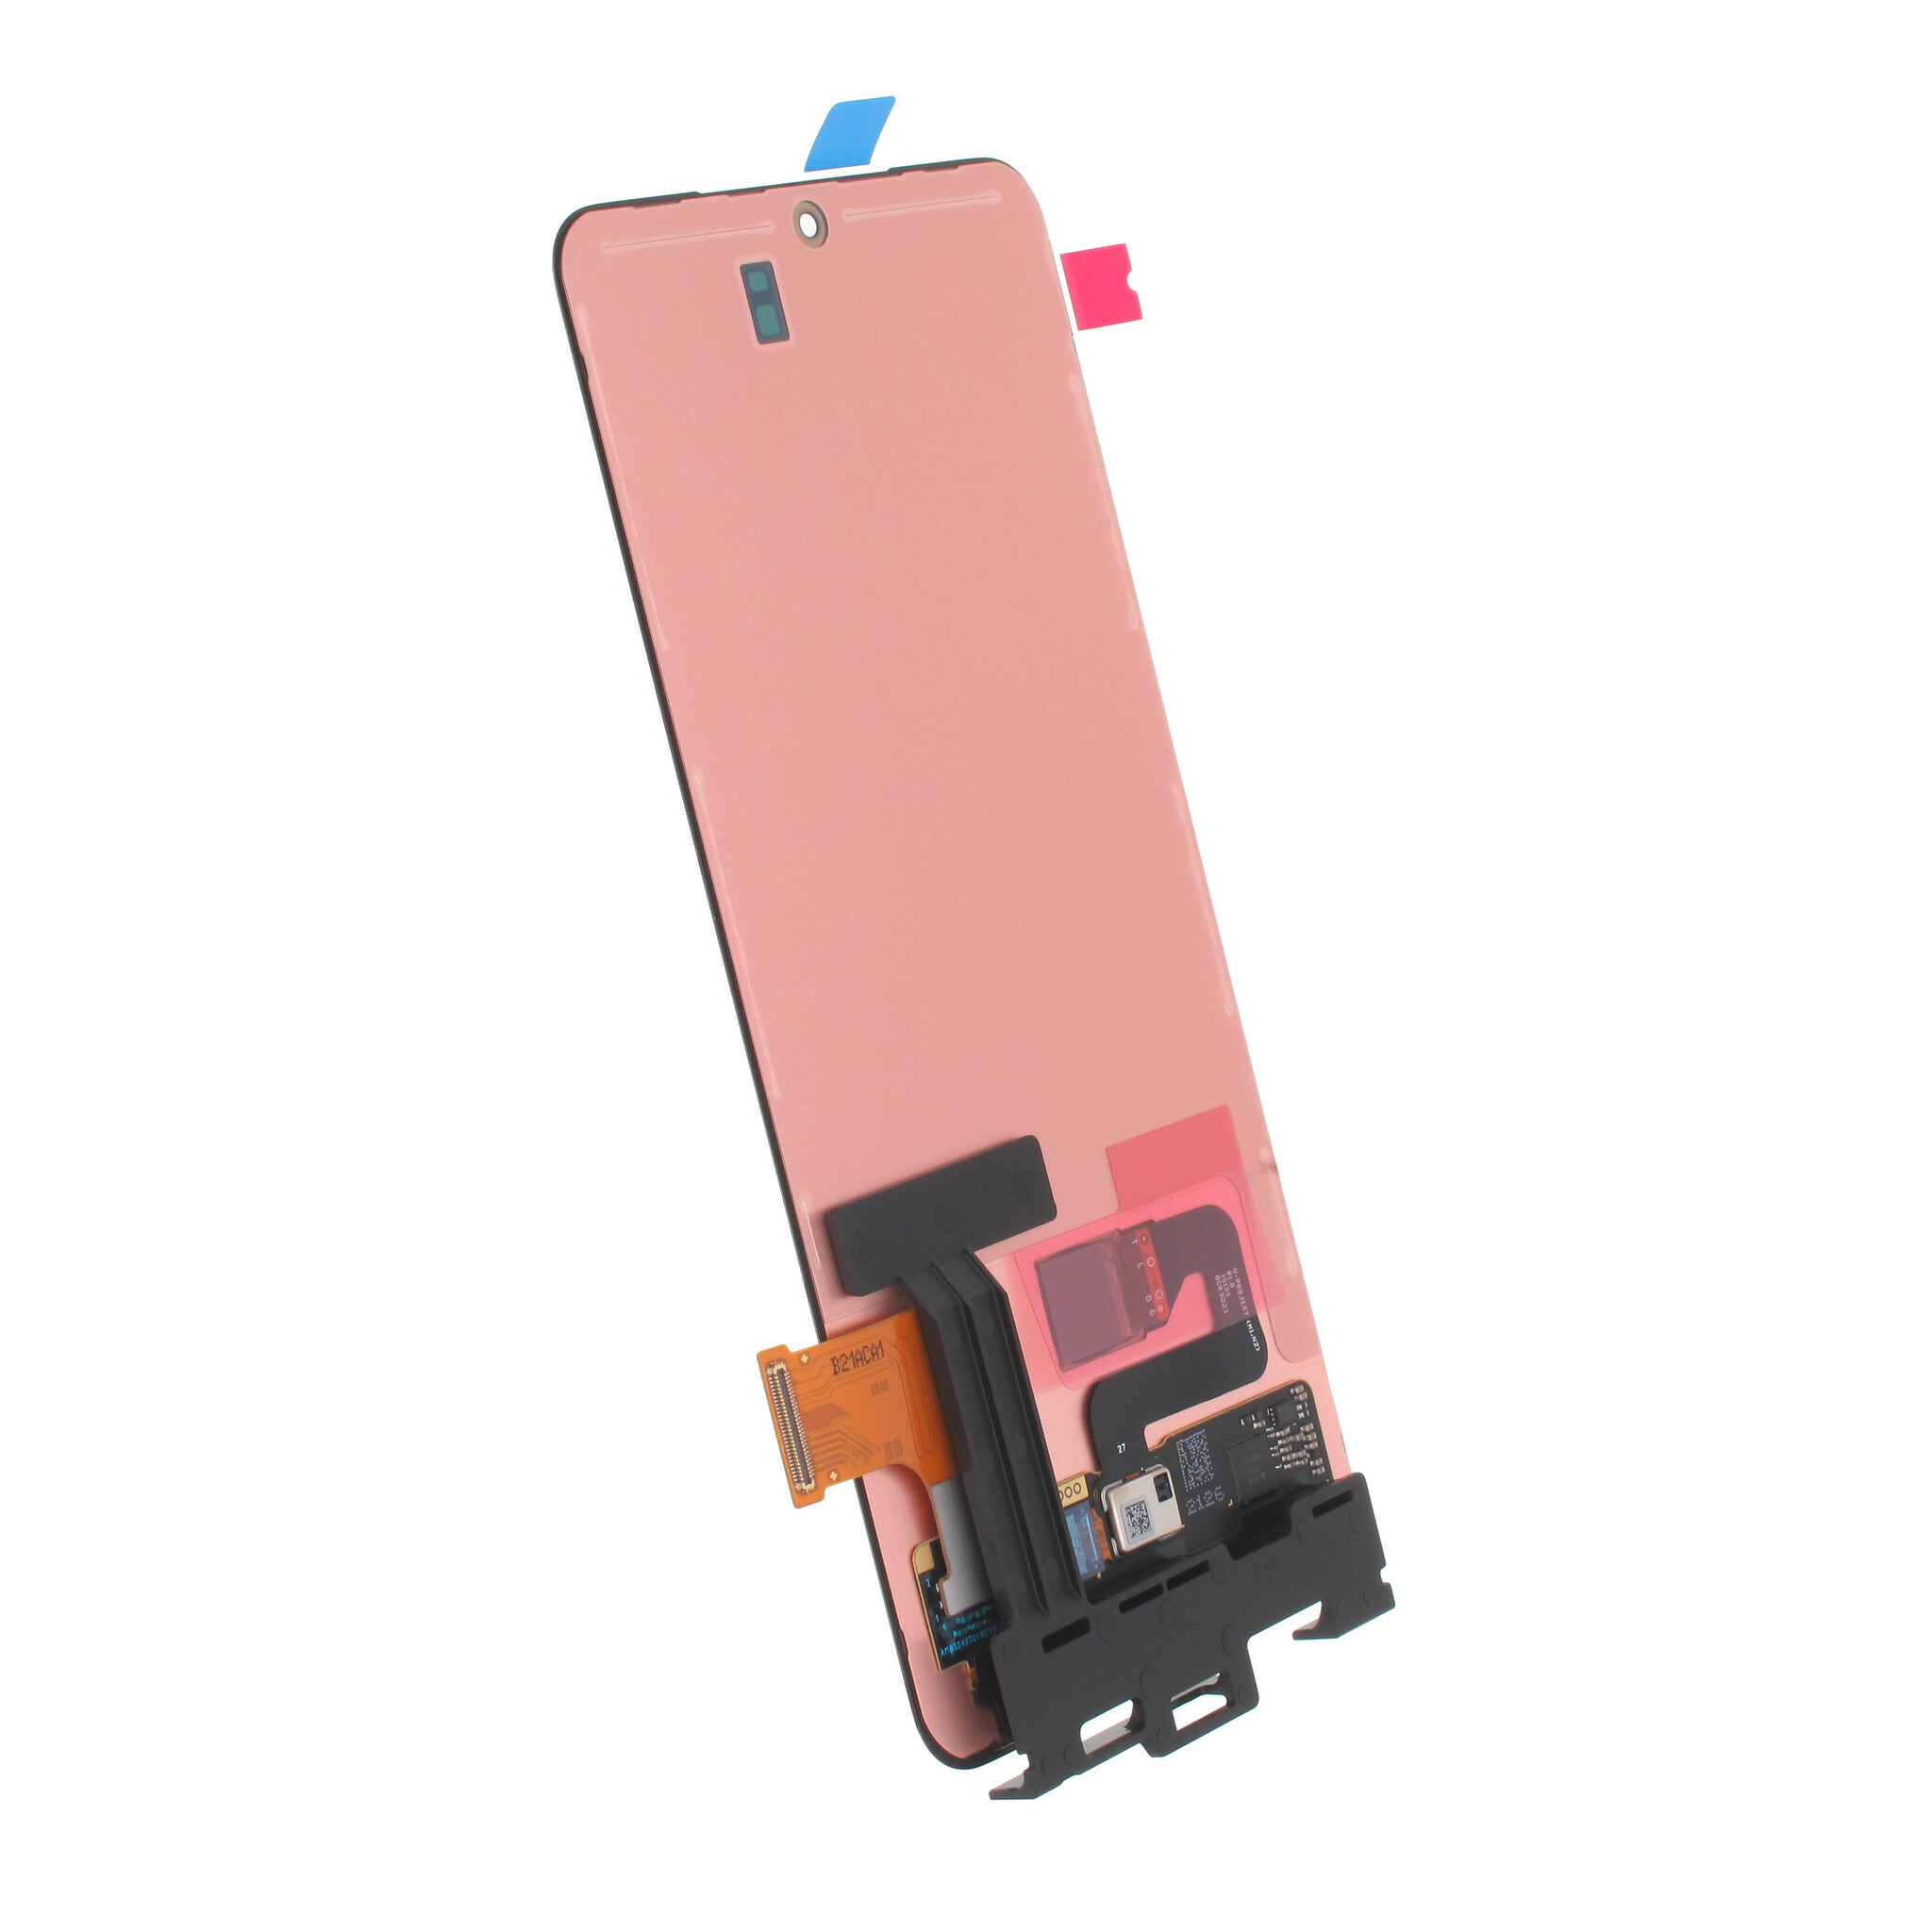 6.2'' AMOLED LCD For Samsung Galaxy s21 Touch Screen Digitizer